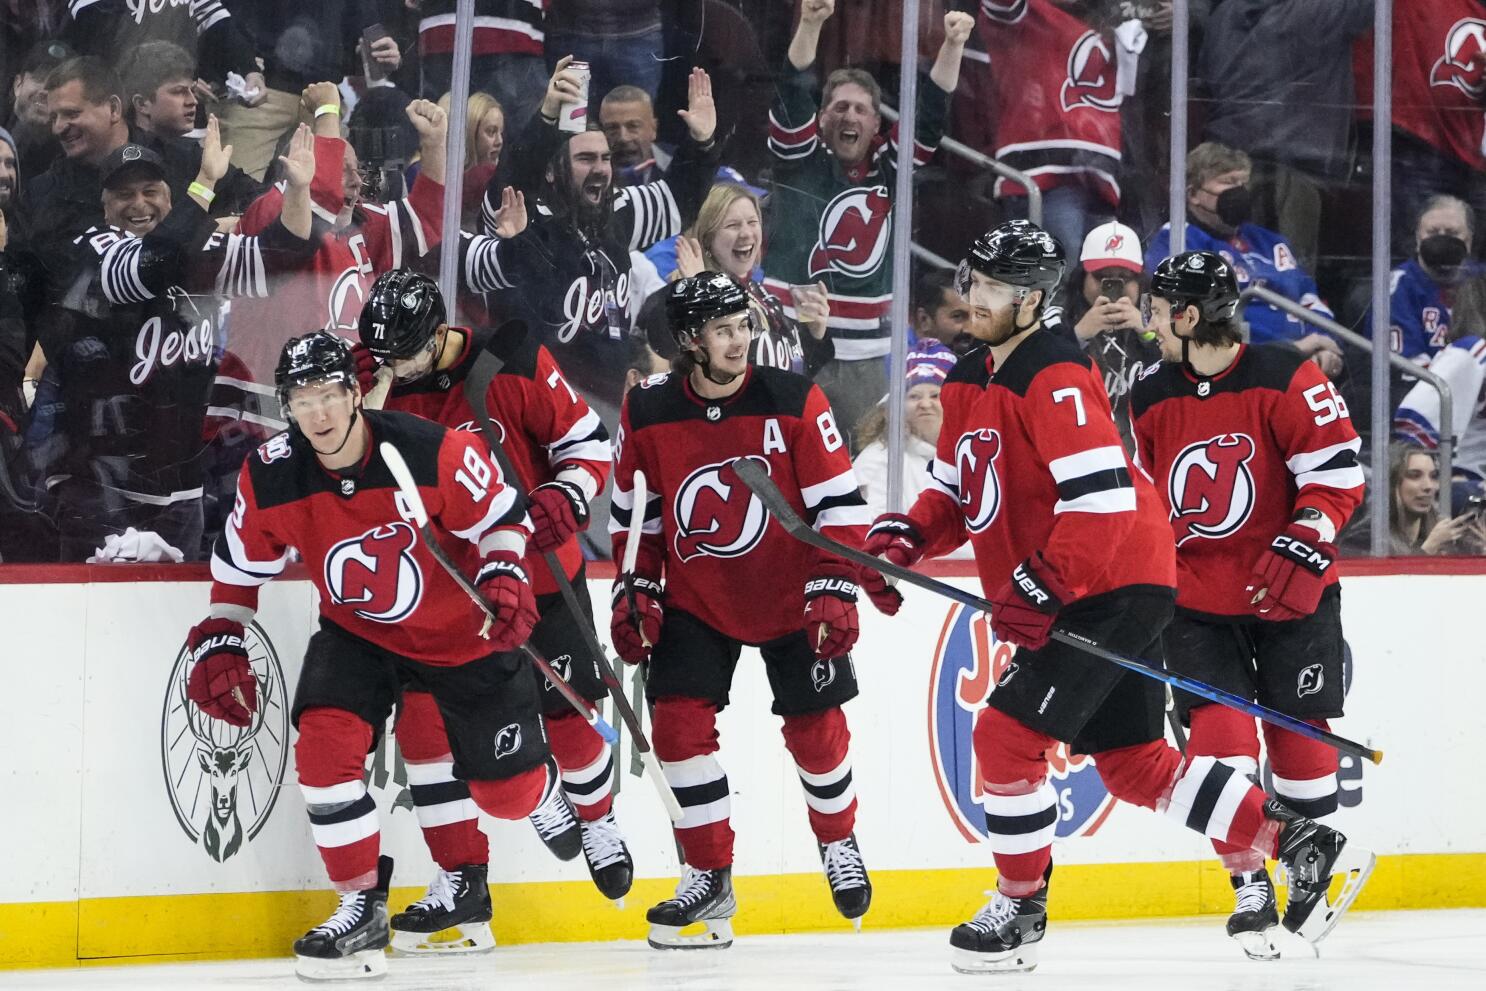 Devils players confident before huge Game 6 vs. Rangers: 'Our focus is to  win that game' 